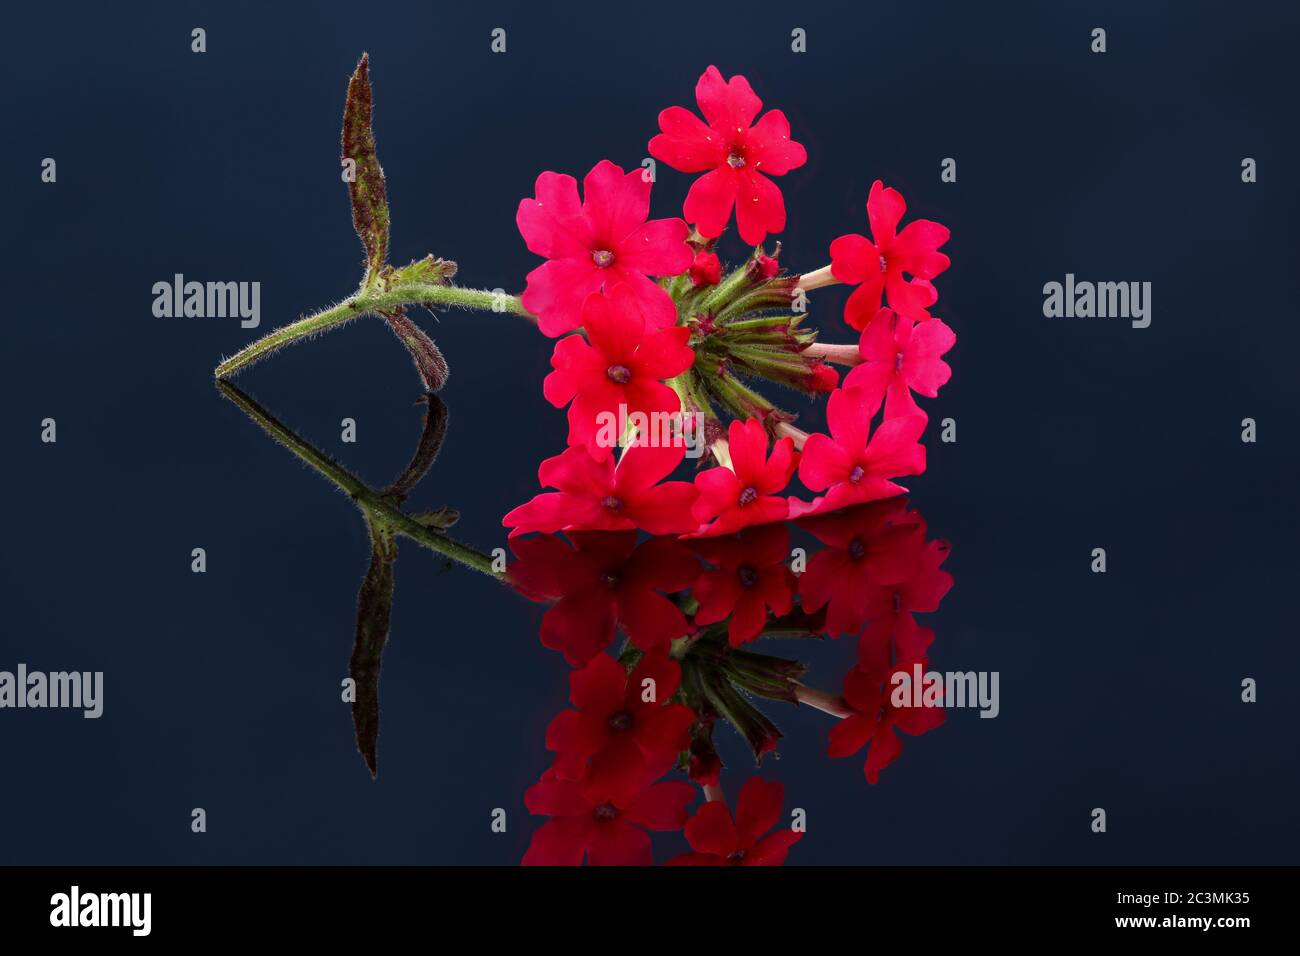 Close-up of red argentinian verbena blossom with mirror image on a black glass plate Stock Photo